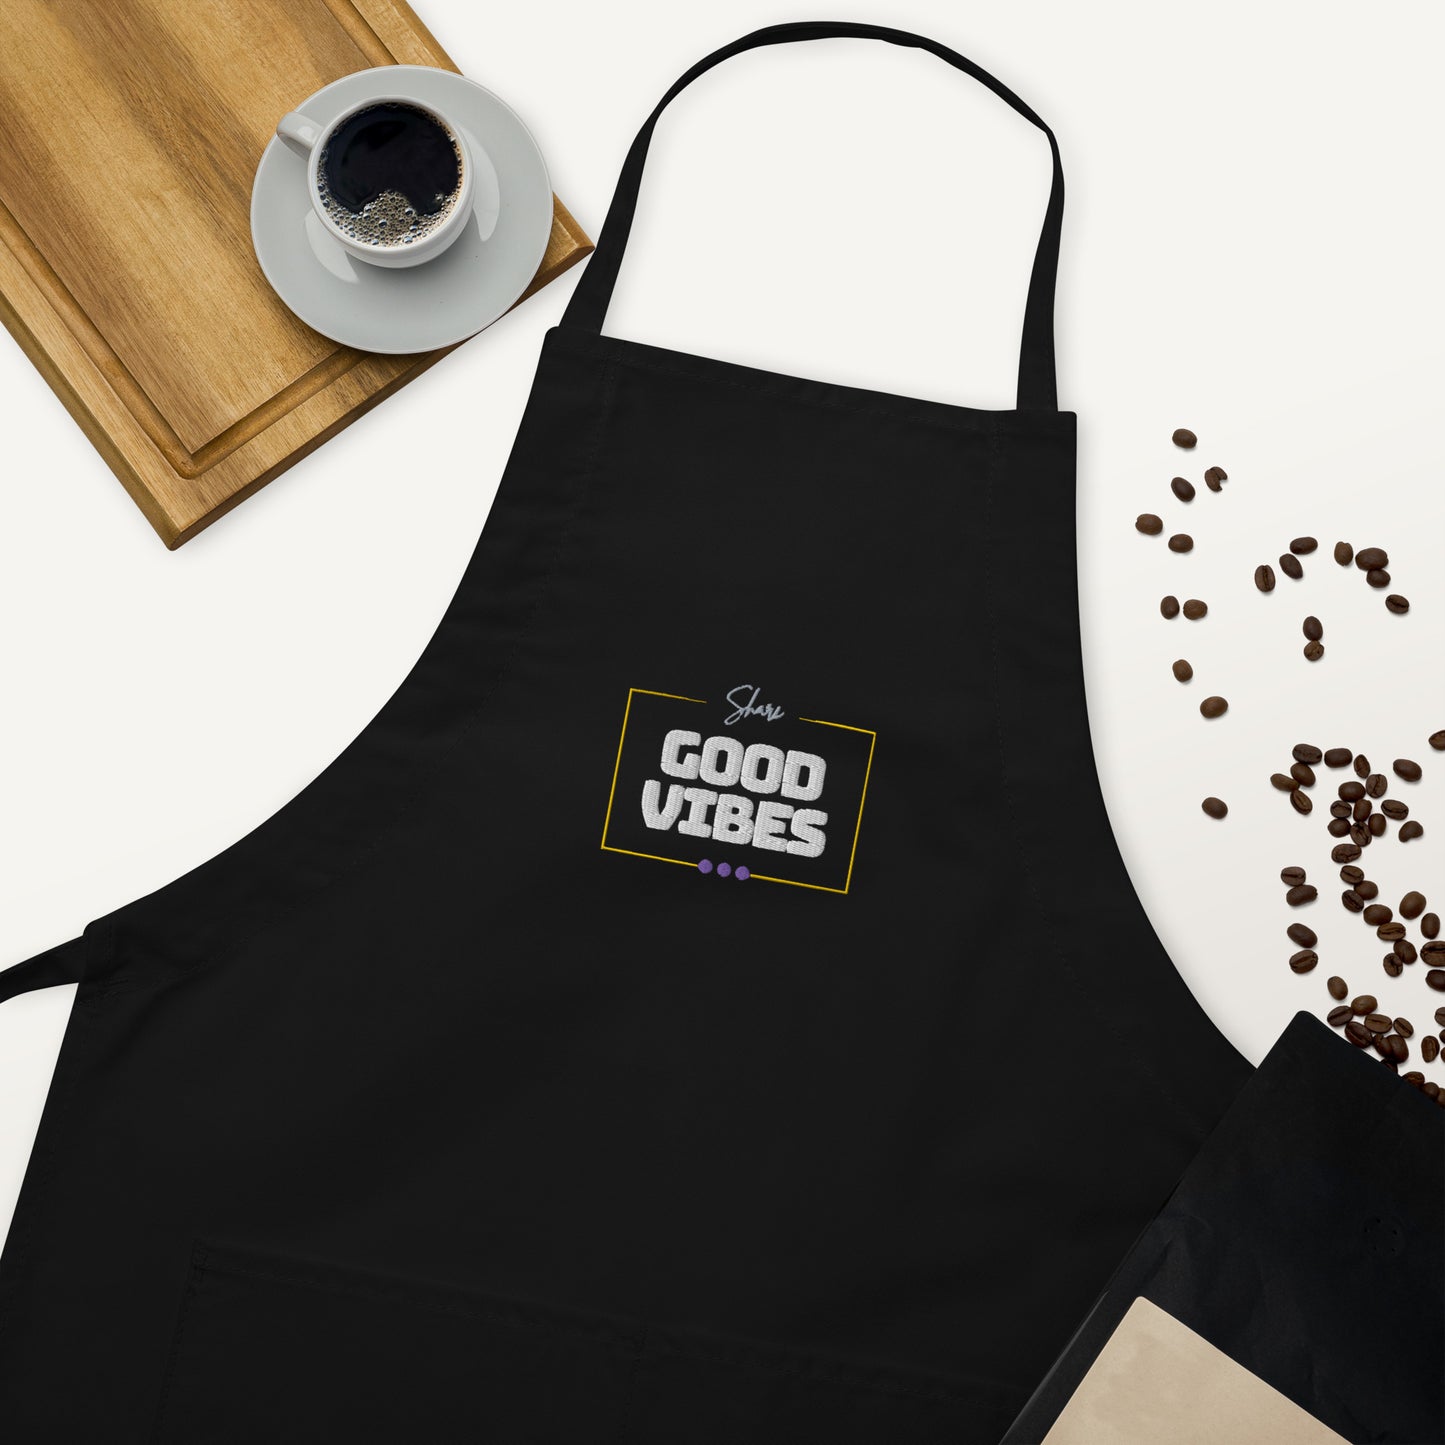 Share Good Vibes Embroidered Apron